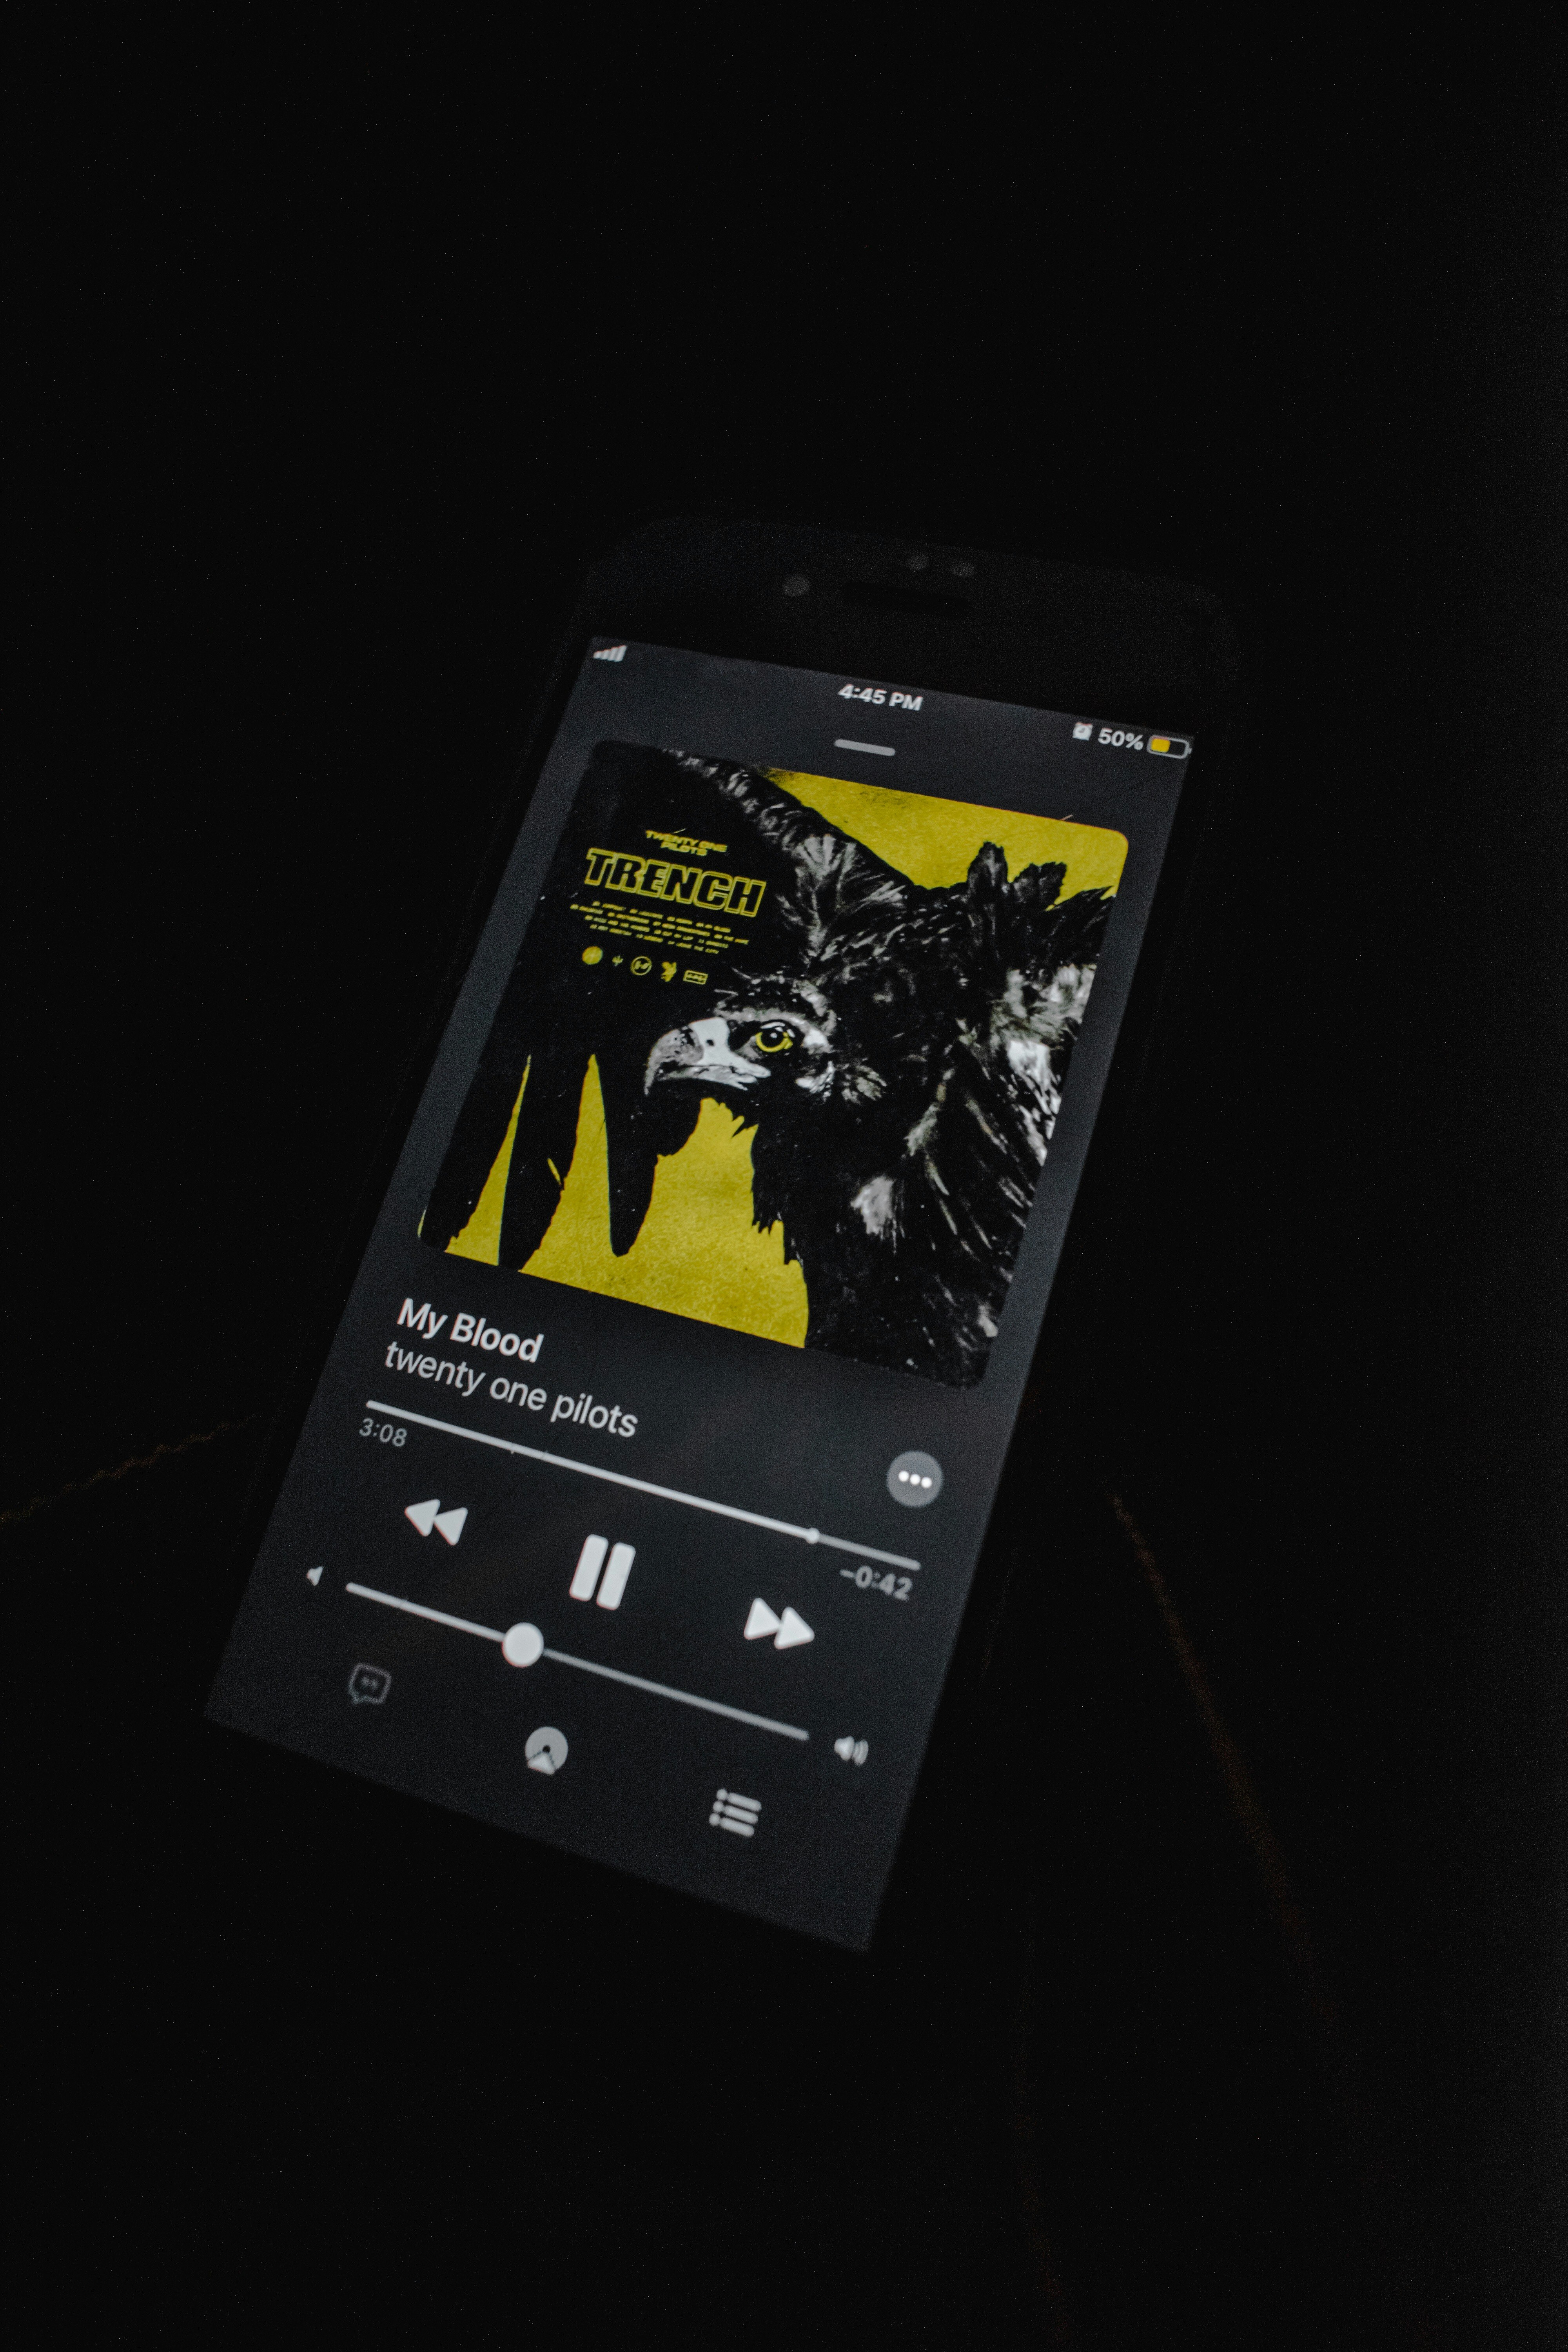 black android smartphone displaying game application